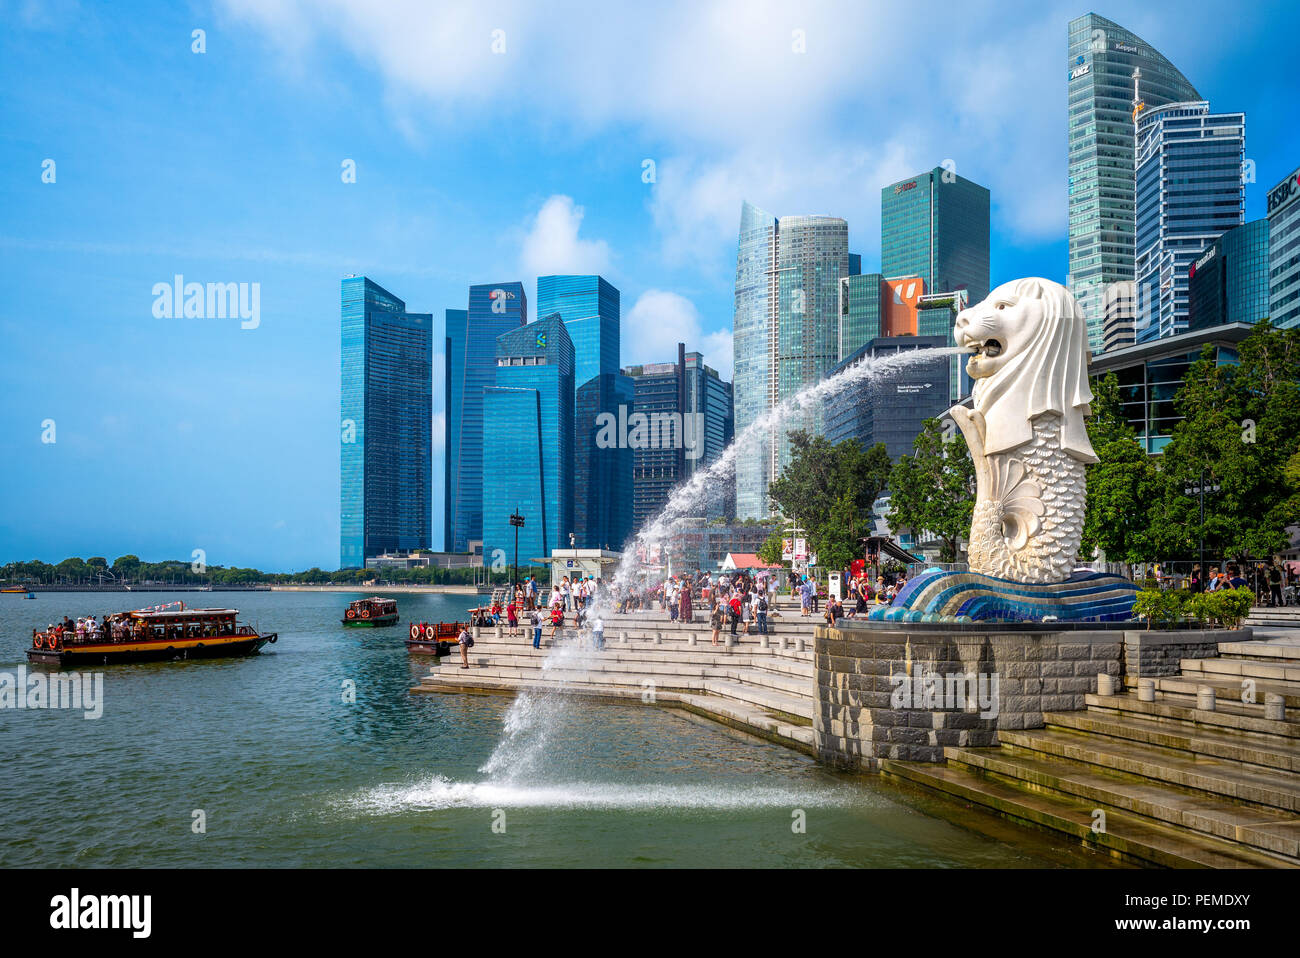 Singapore - August 10, 2018: Merlion Statue at Marina Bay, a mythical creature with a lion's head and the body of a fish Stock Photo